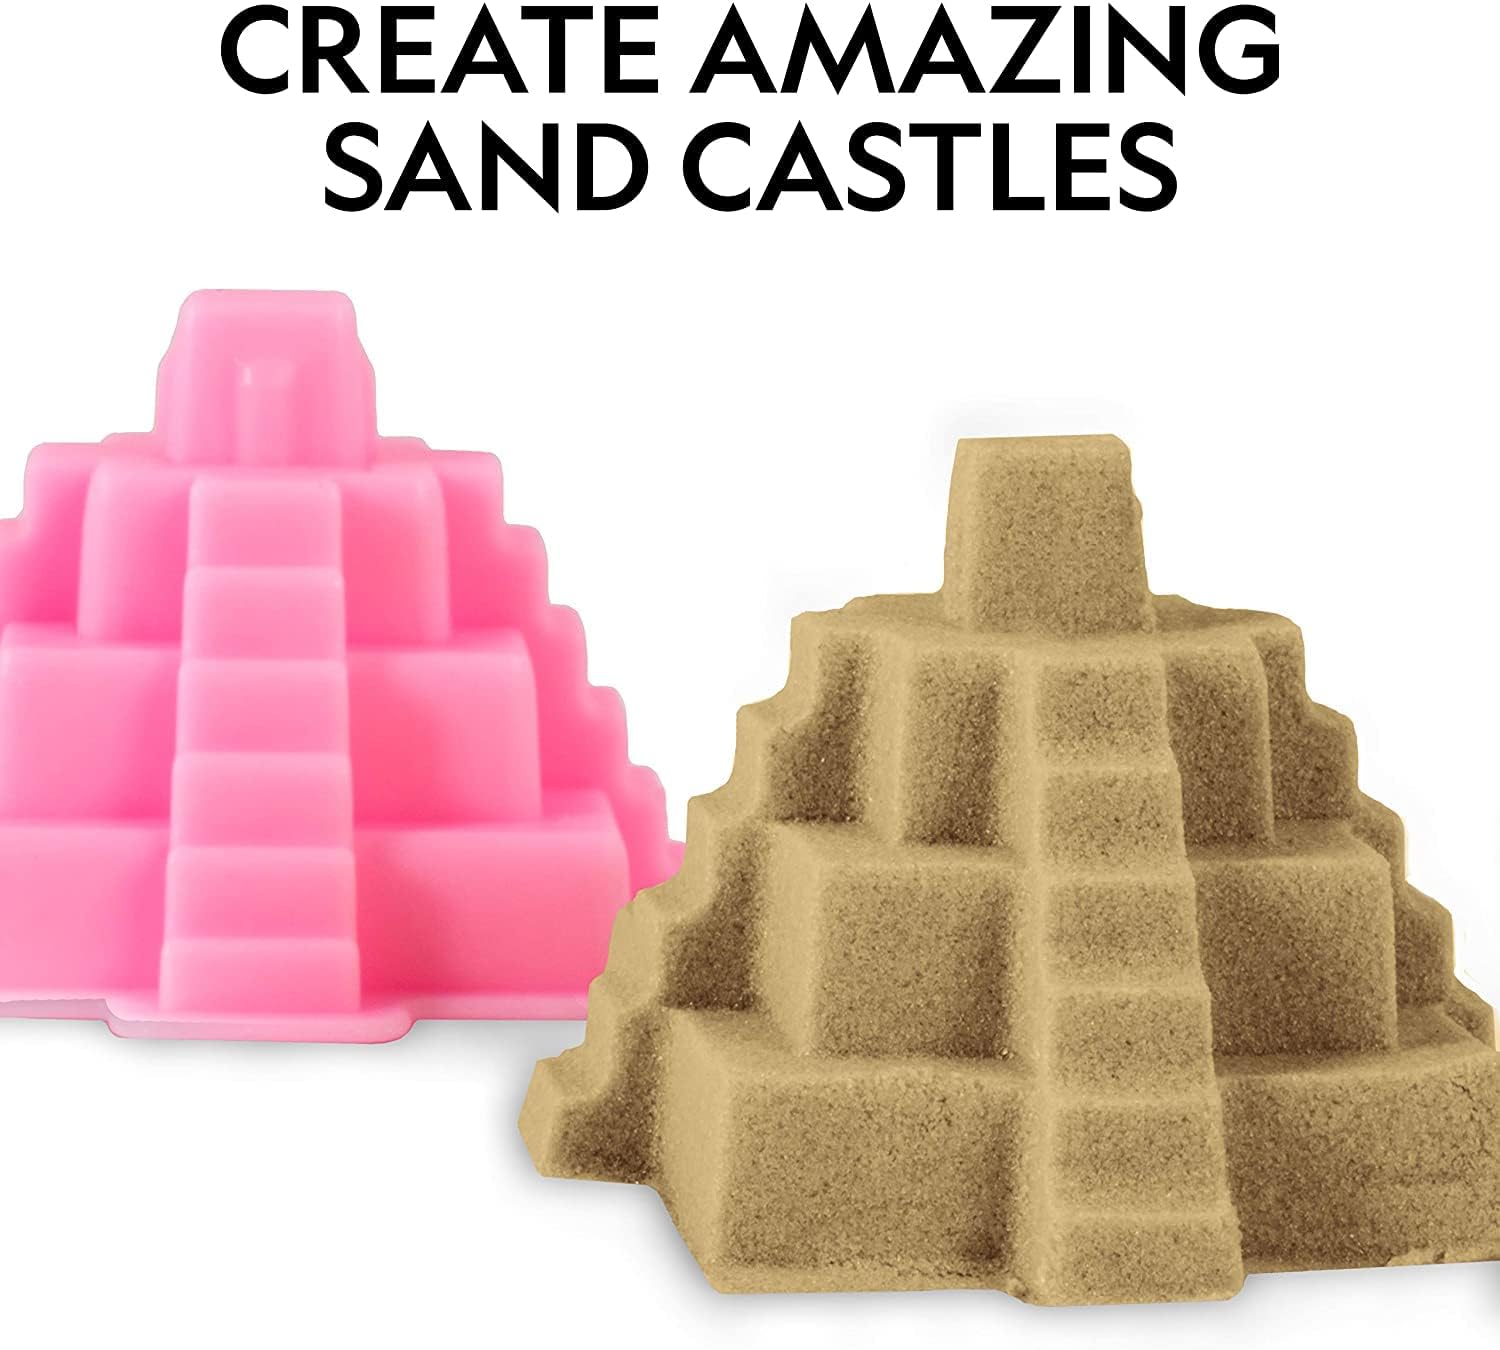 NATIONAL GEOGRAPHIC 6 Lb. Play Sand Combo Pack - 2 Lbs. Each of Blue, Purple and Natural Sand with Castle Molds - A Fun No Mess Sensory Activity, Kids Fake Sand Play Set (Amazon Exclusive)